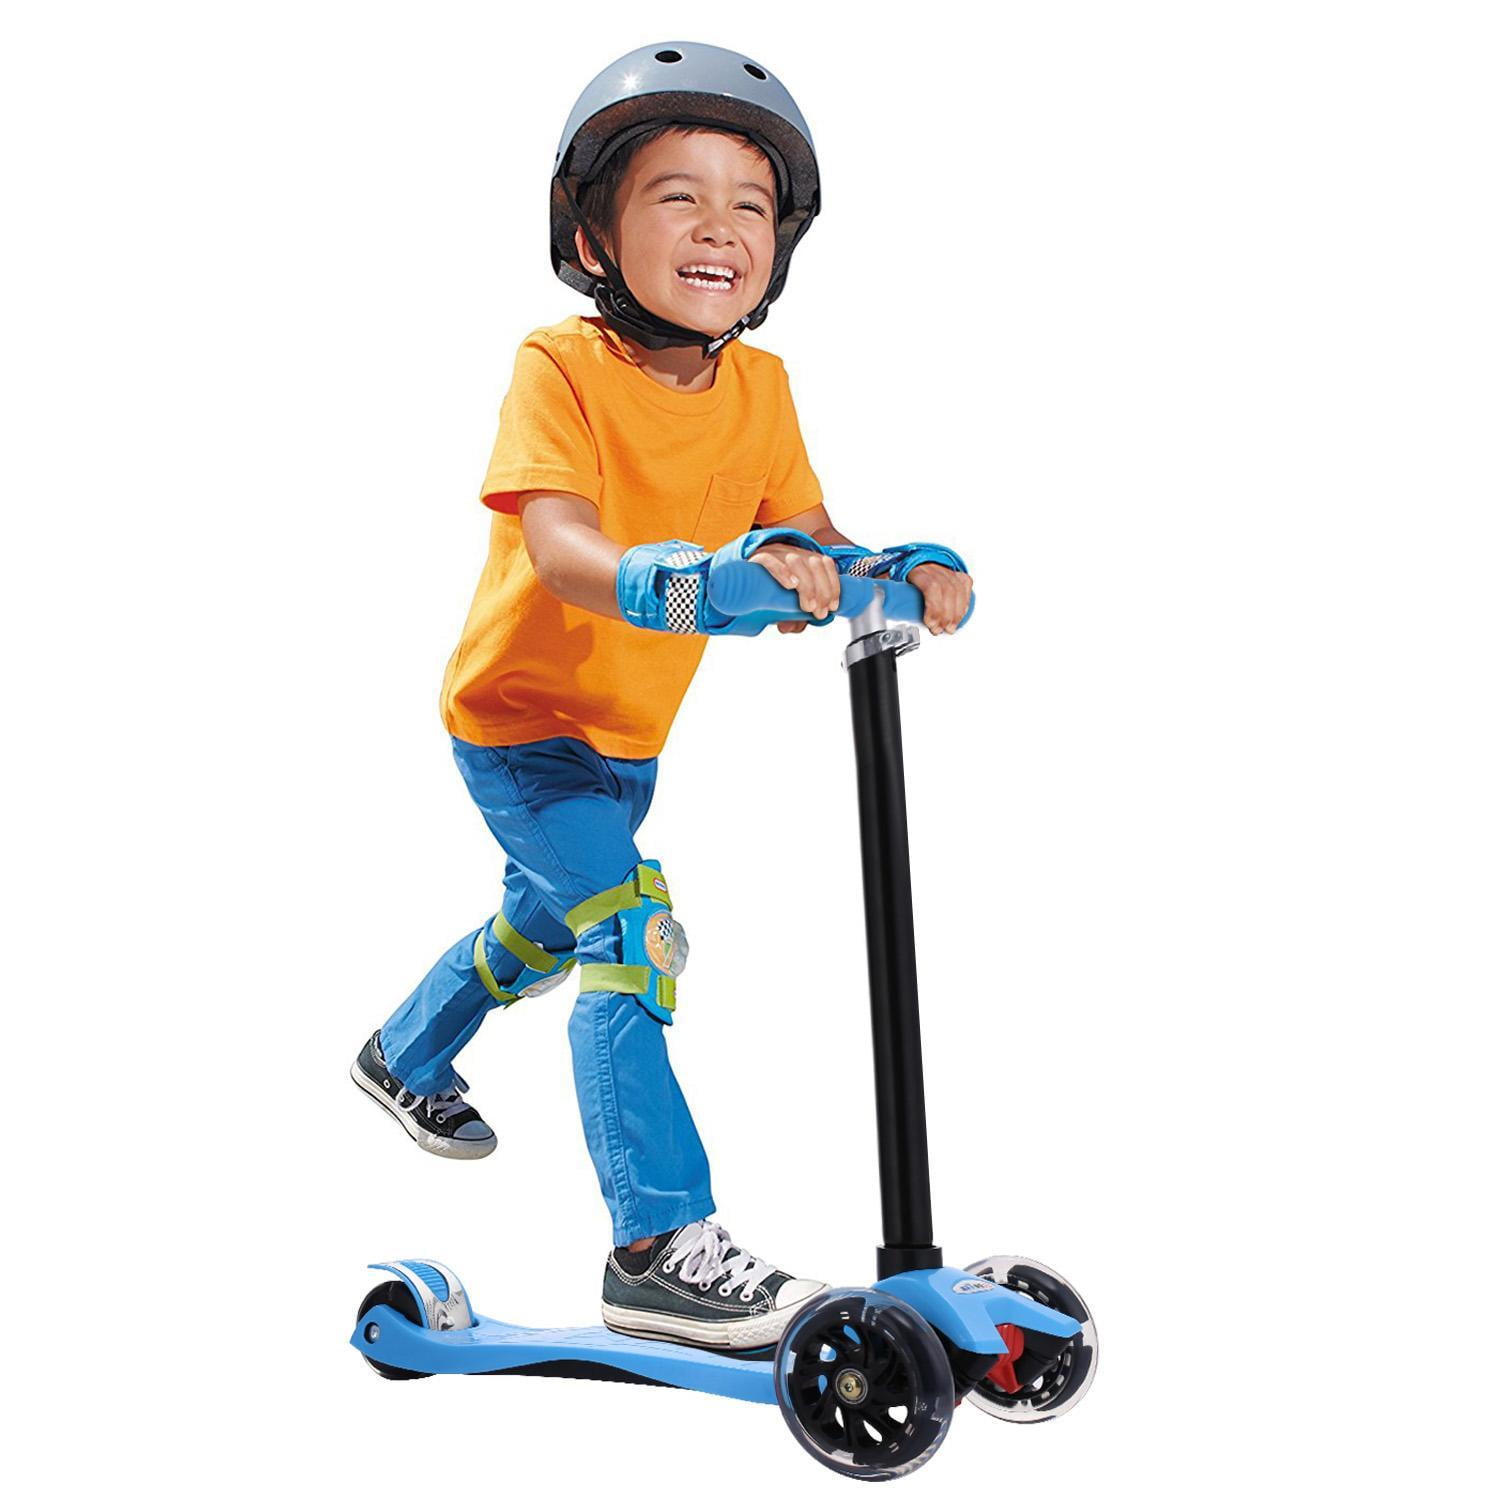 kids playing scooter